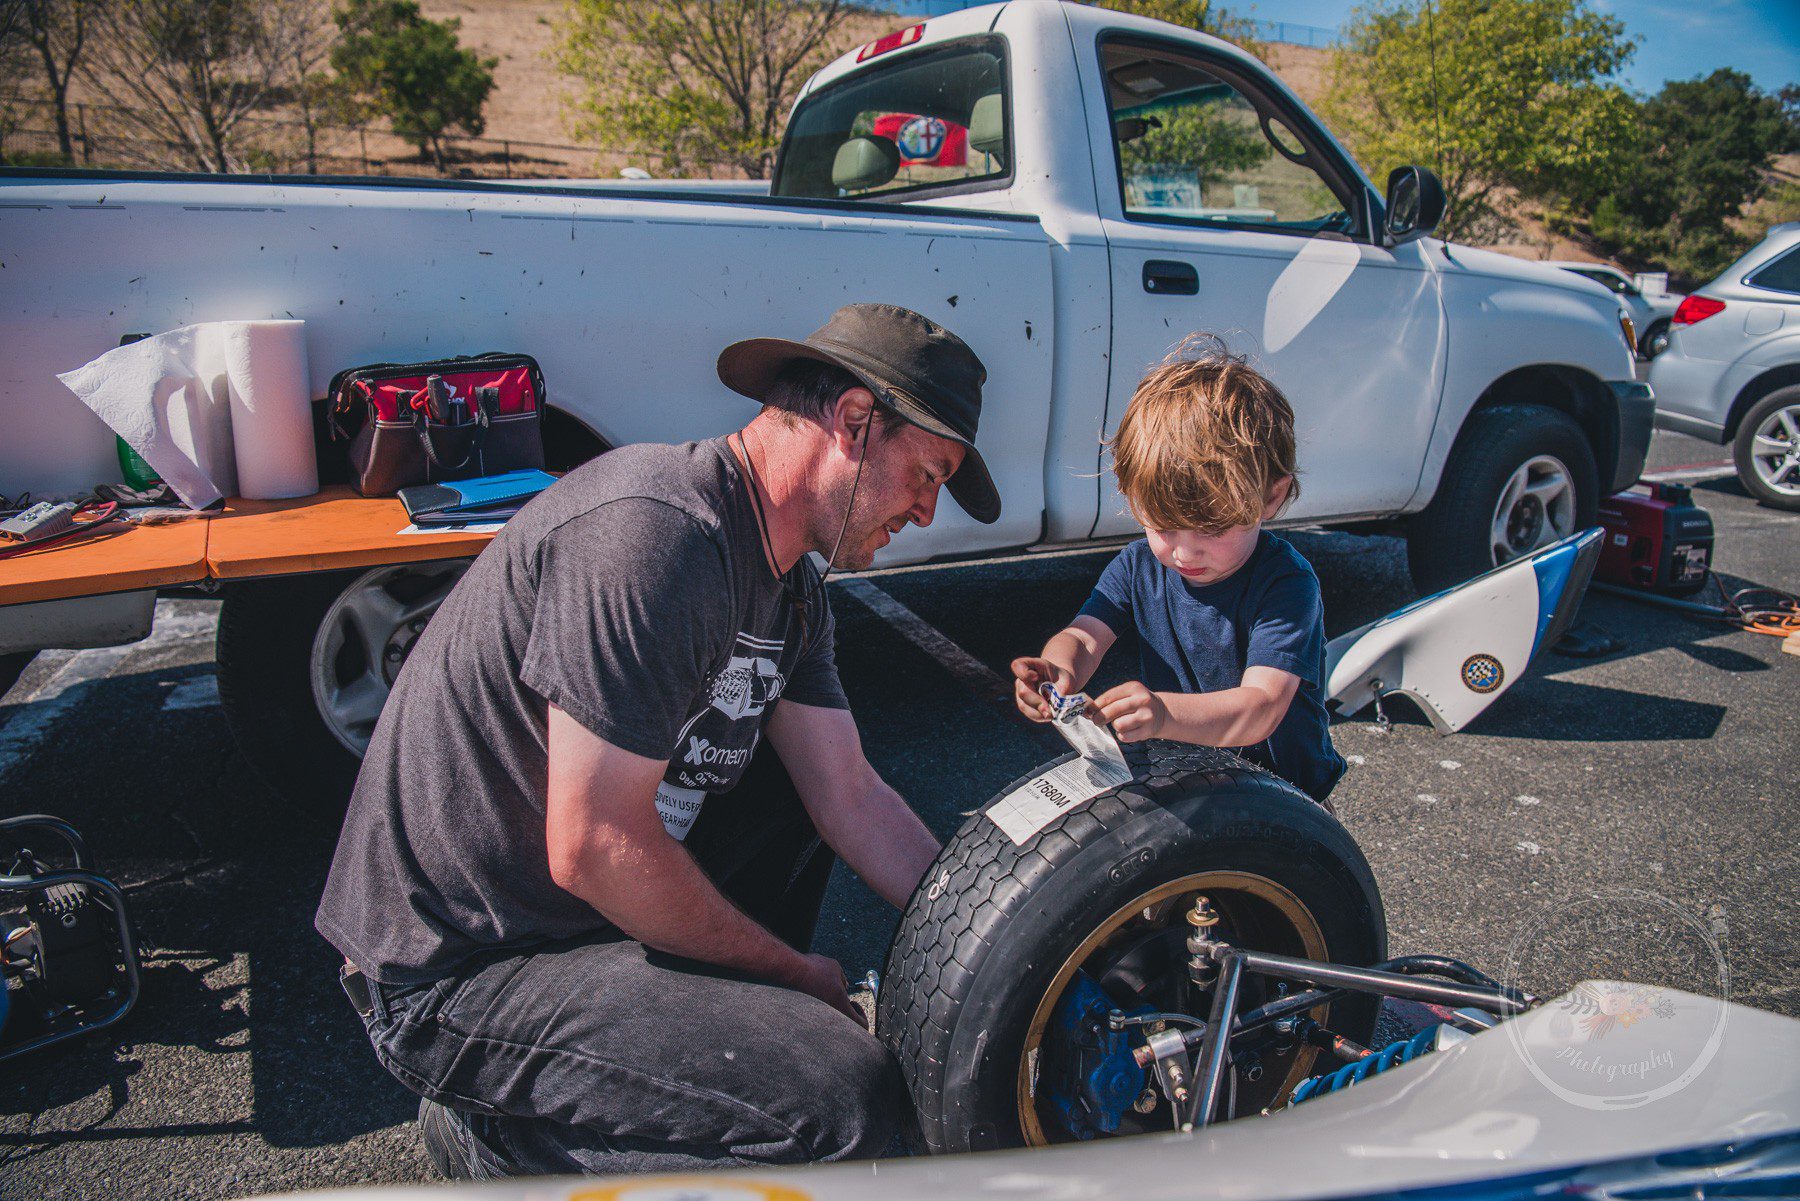 A young race enthusiast helps his Dad prep the race car in the Paddock